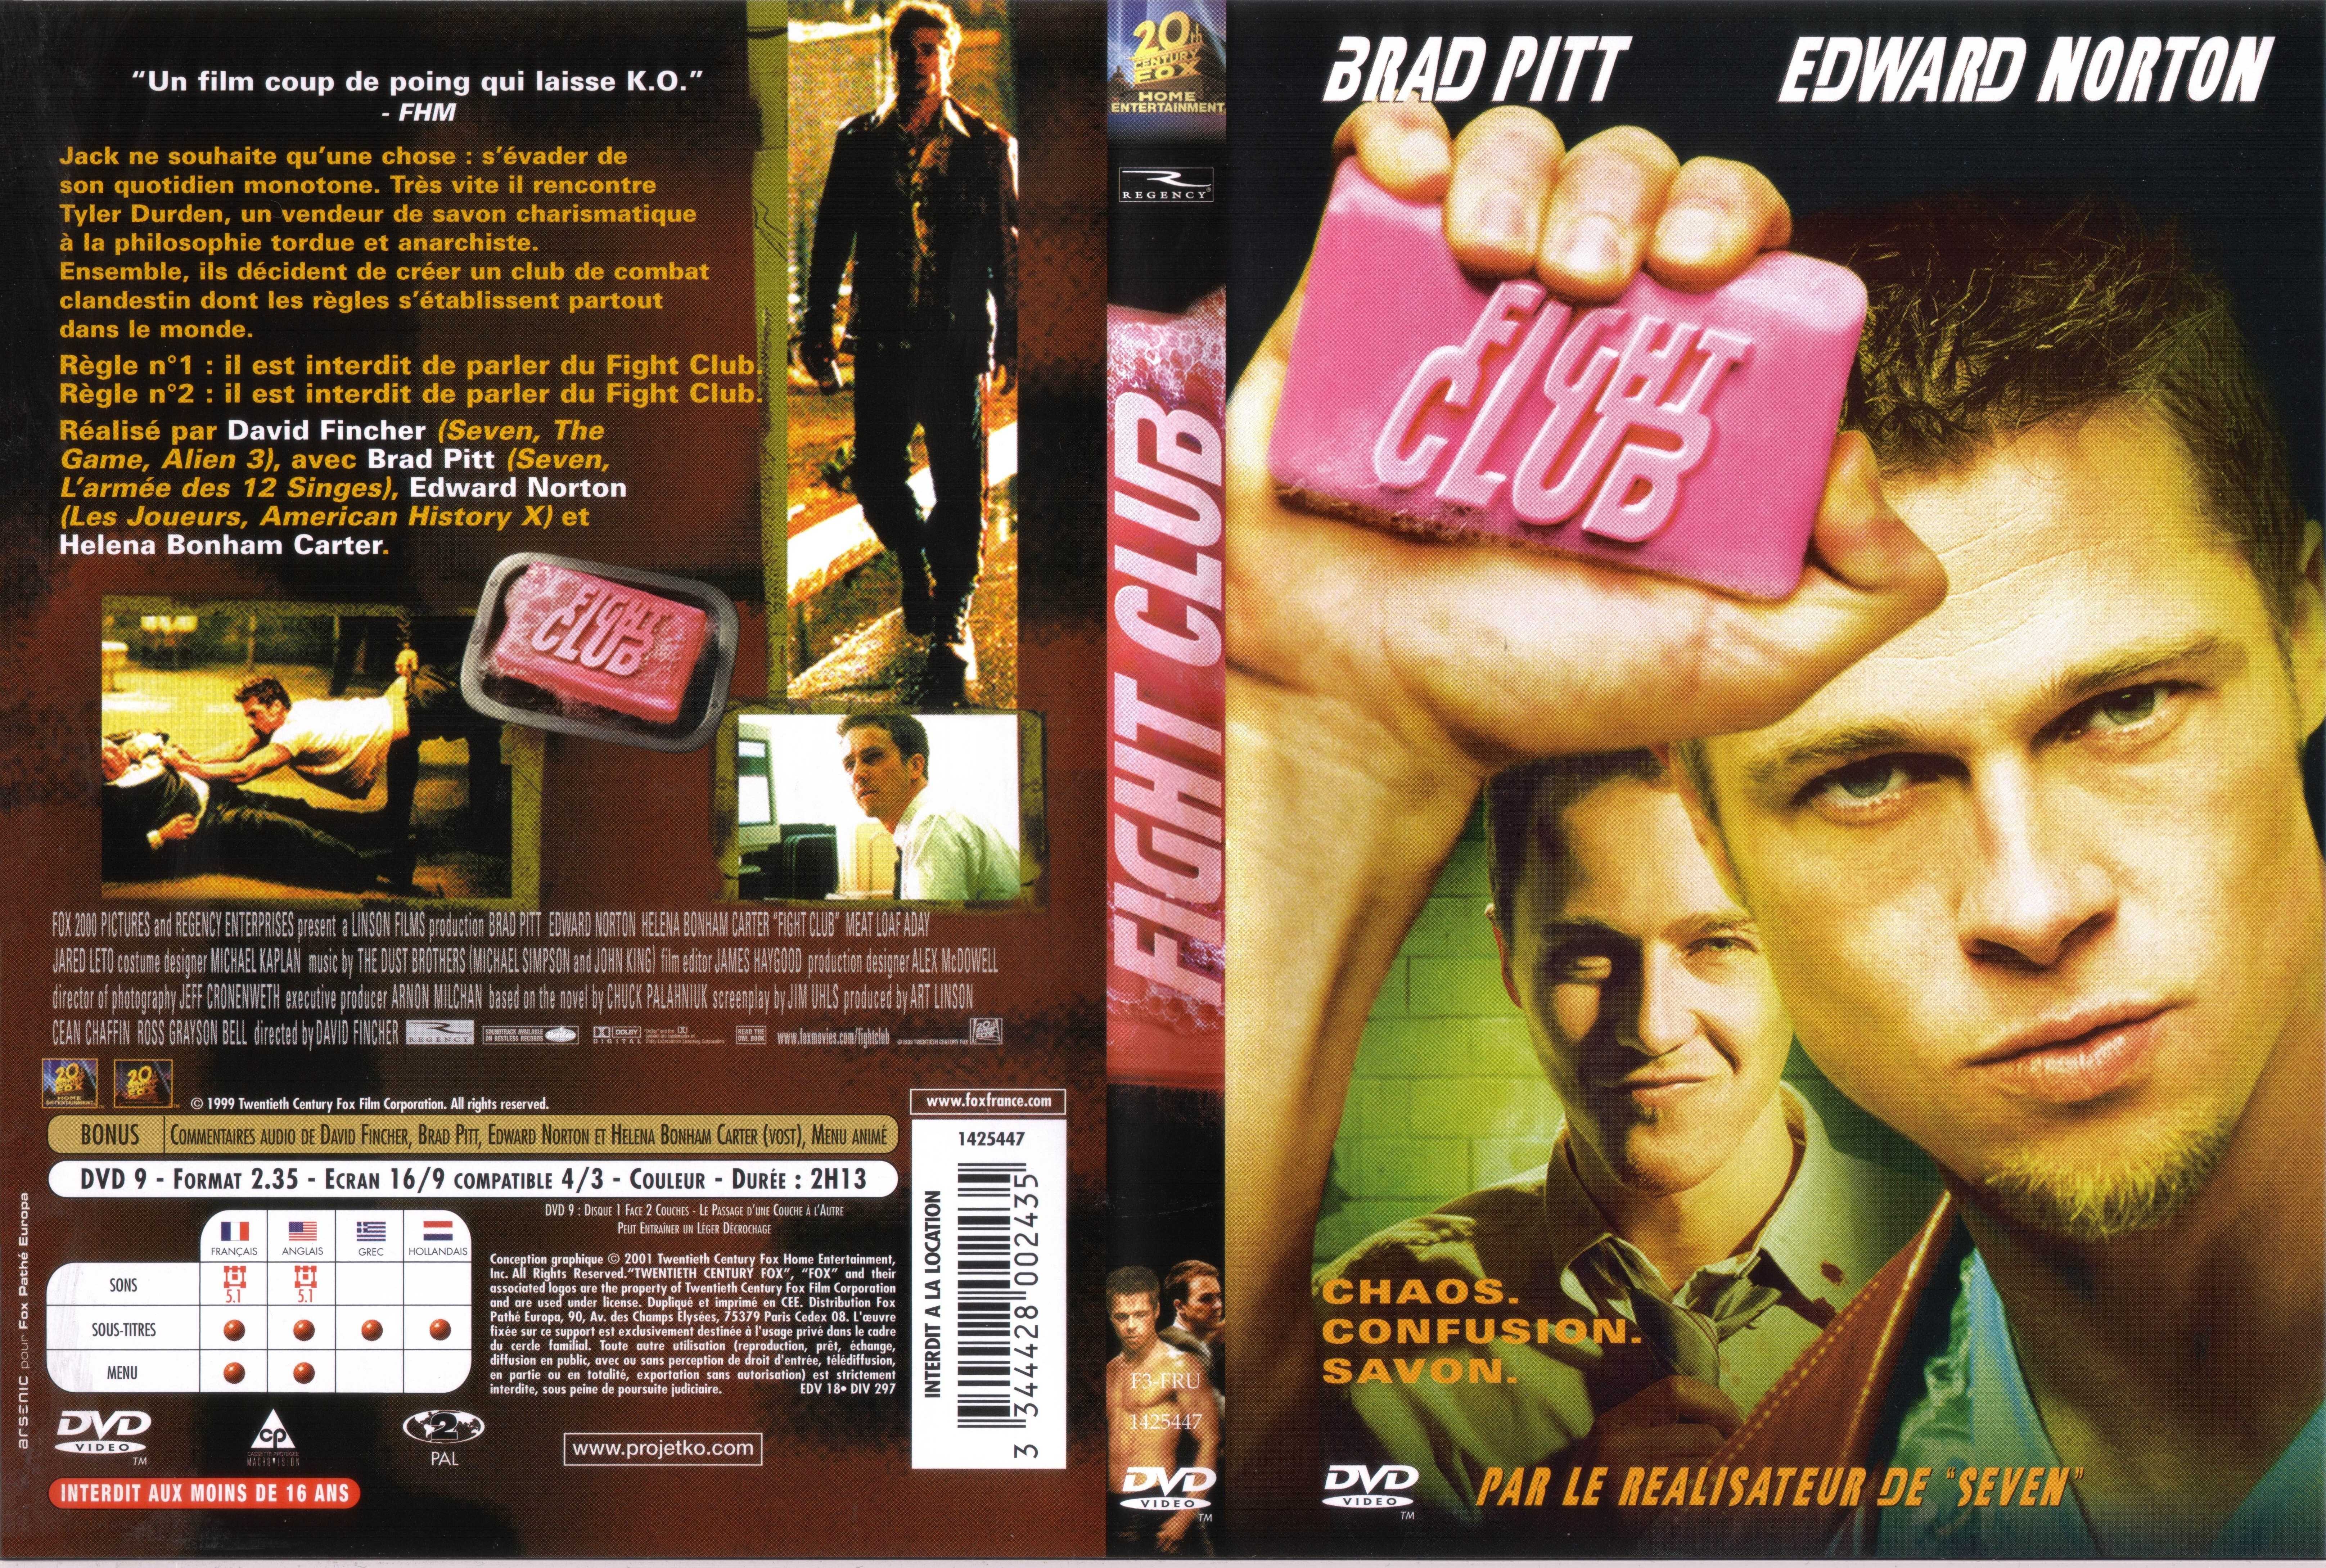 Jaquette DVD Fight club